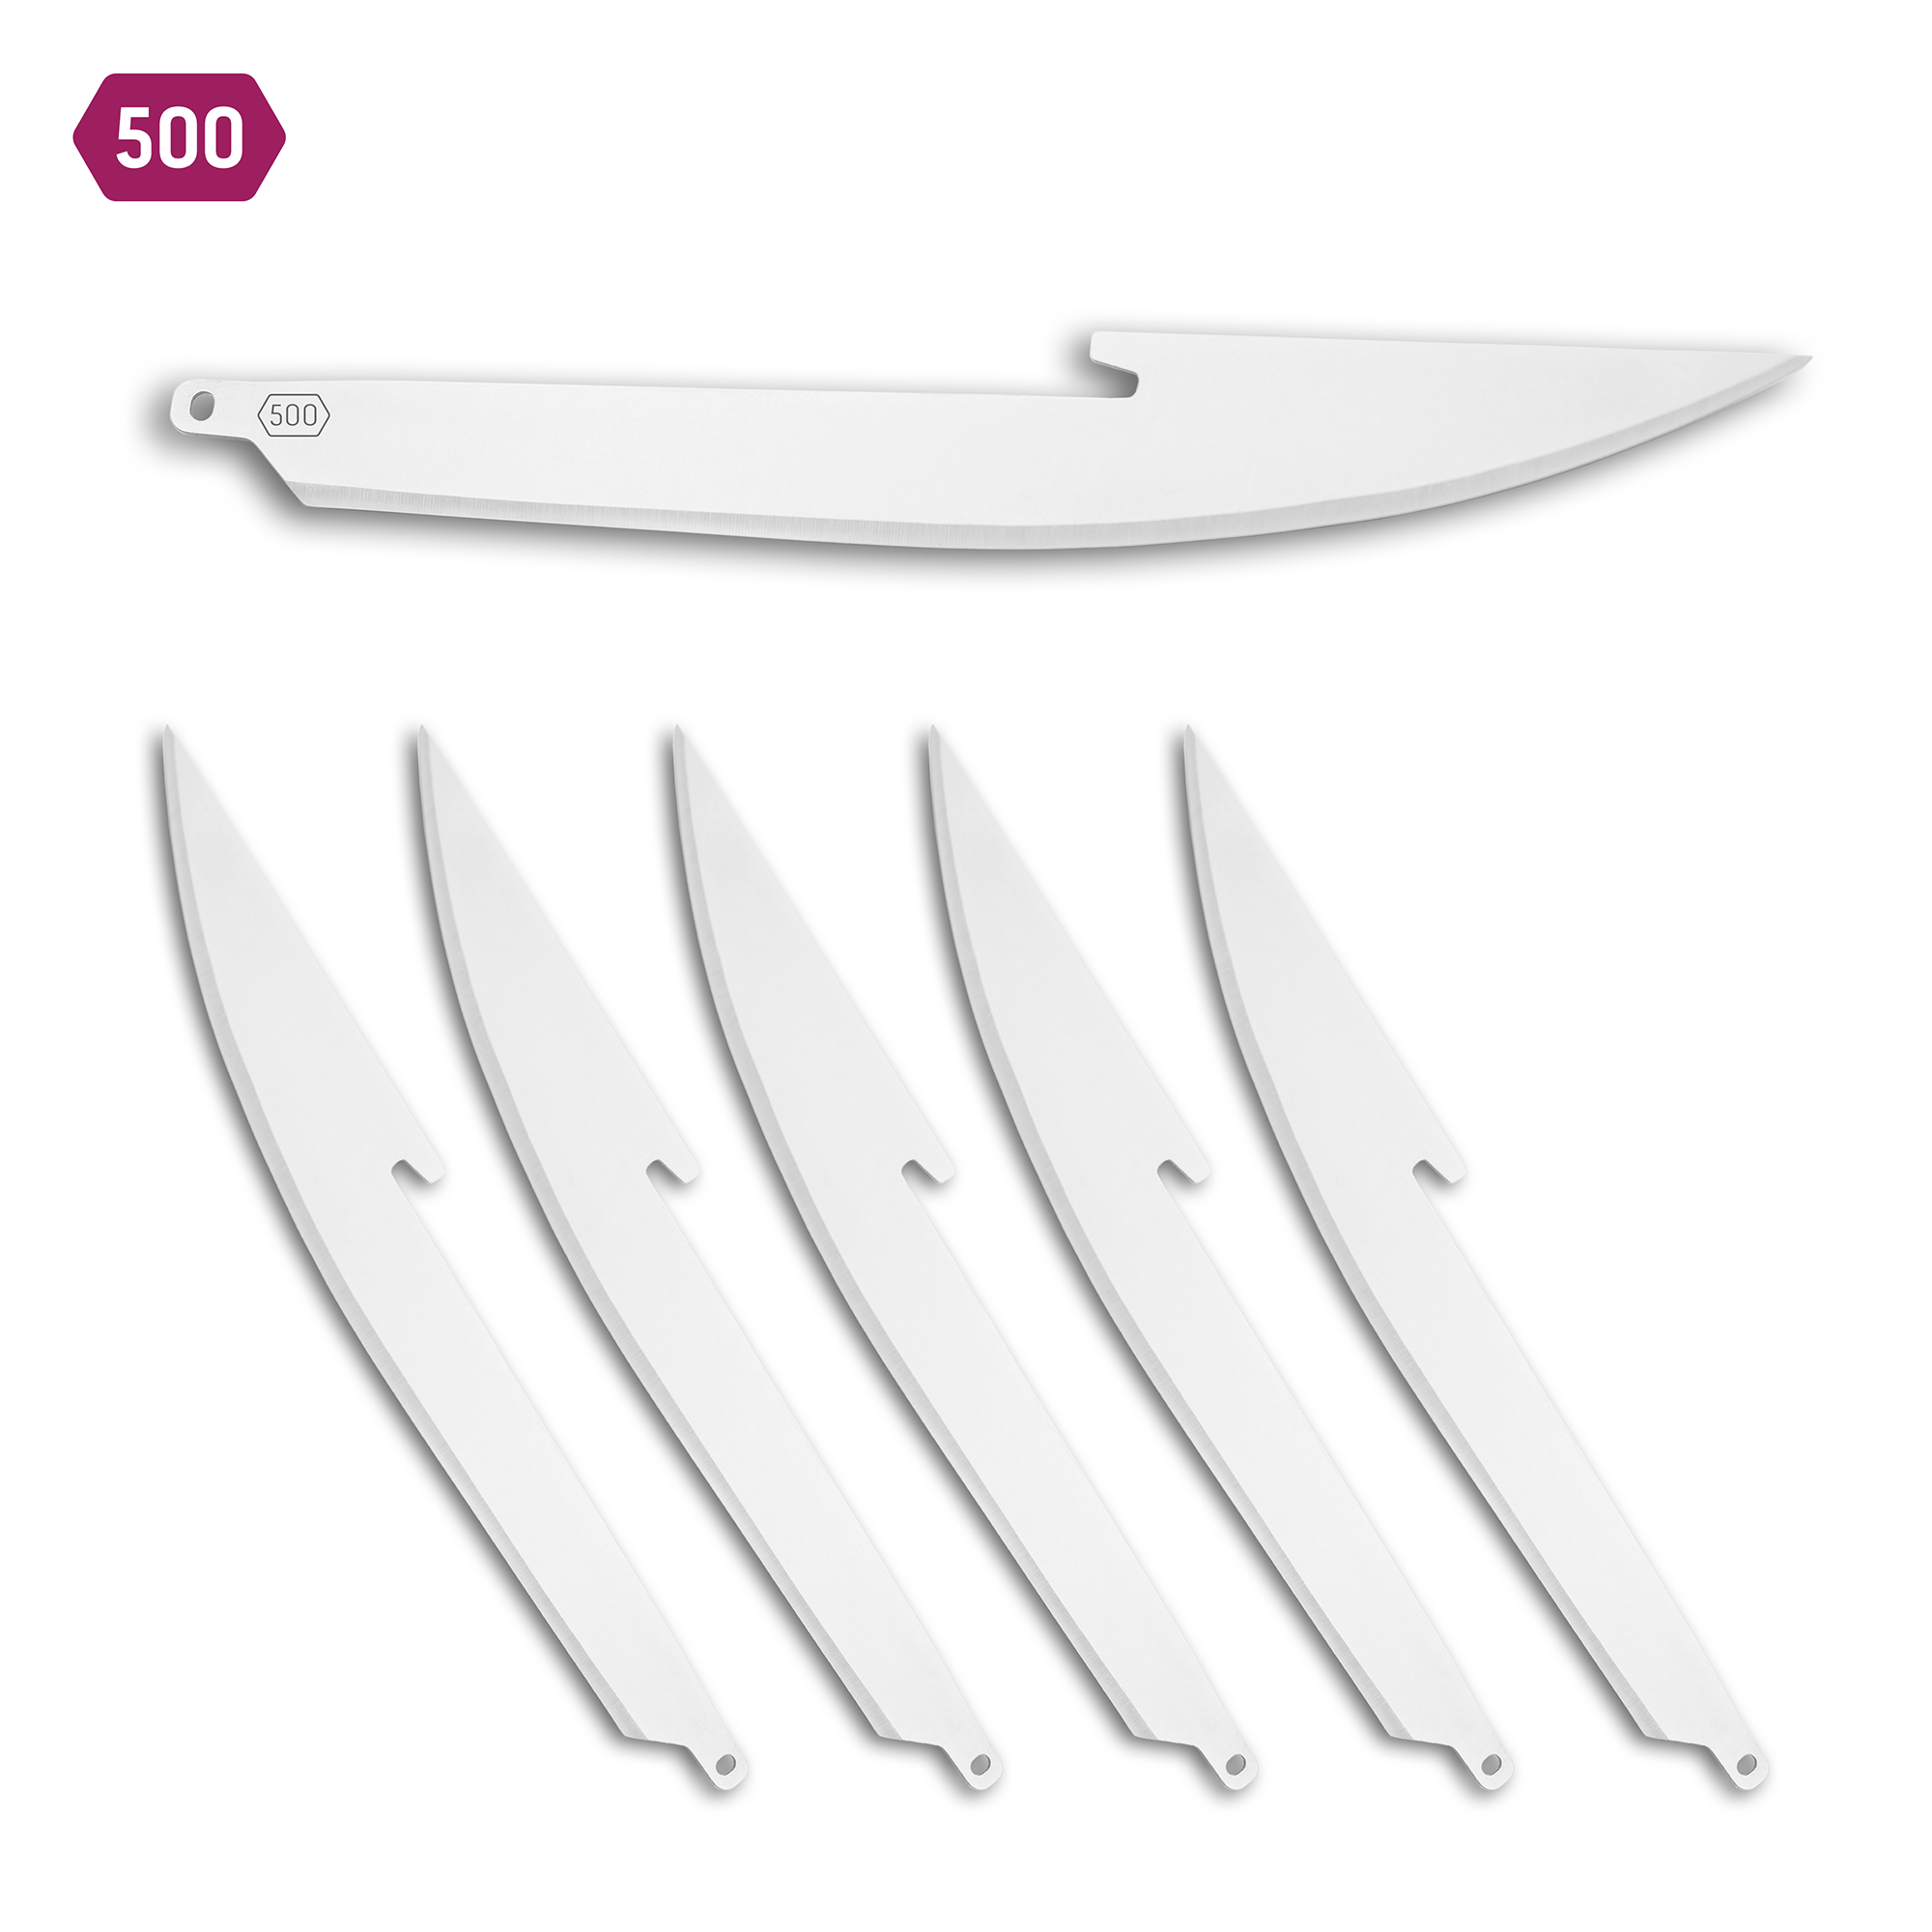 500 (5.0) Boning/Fillet Replacement Blade 6-pack - Stainless